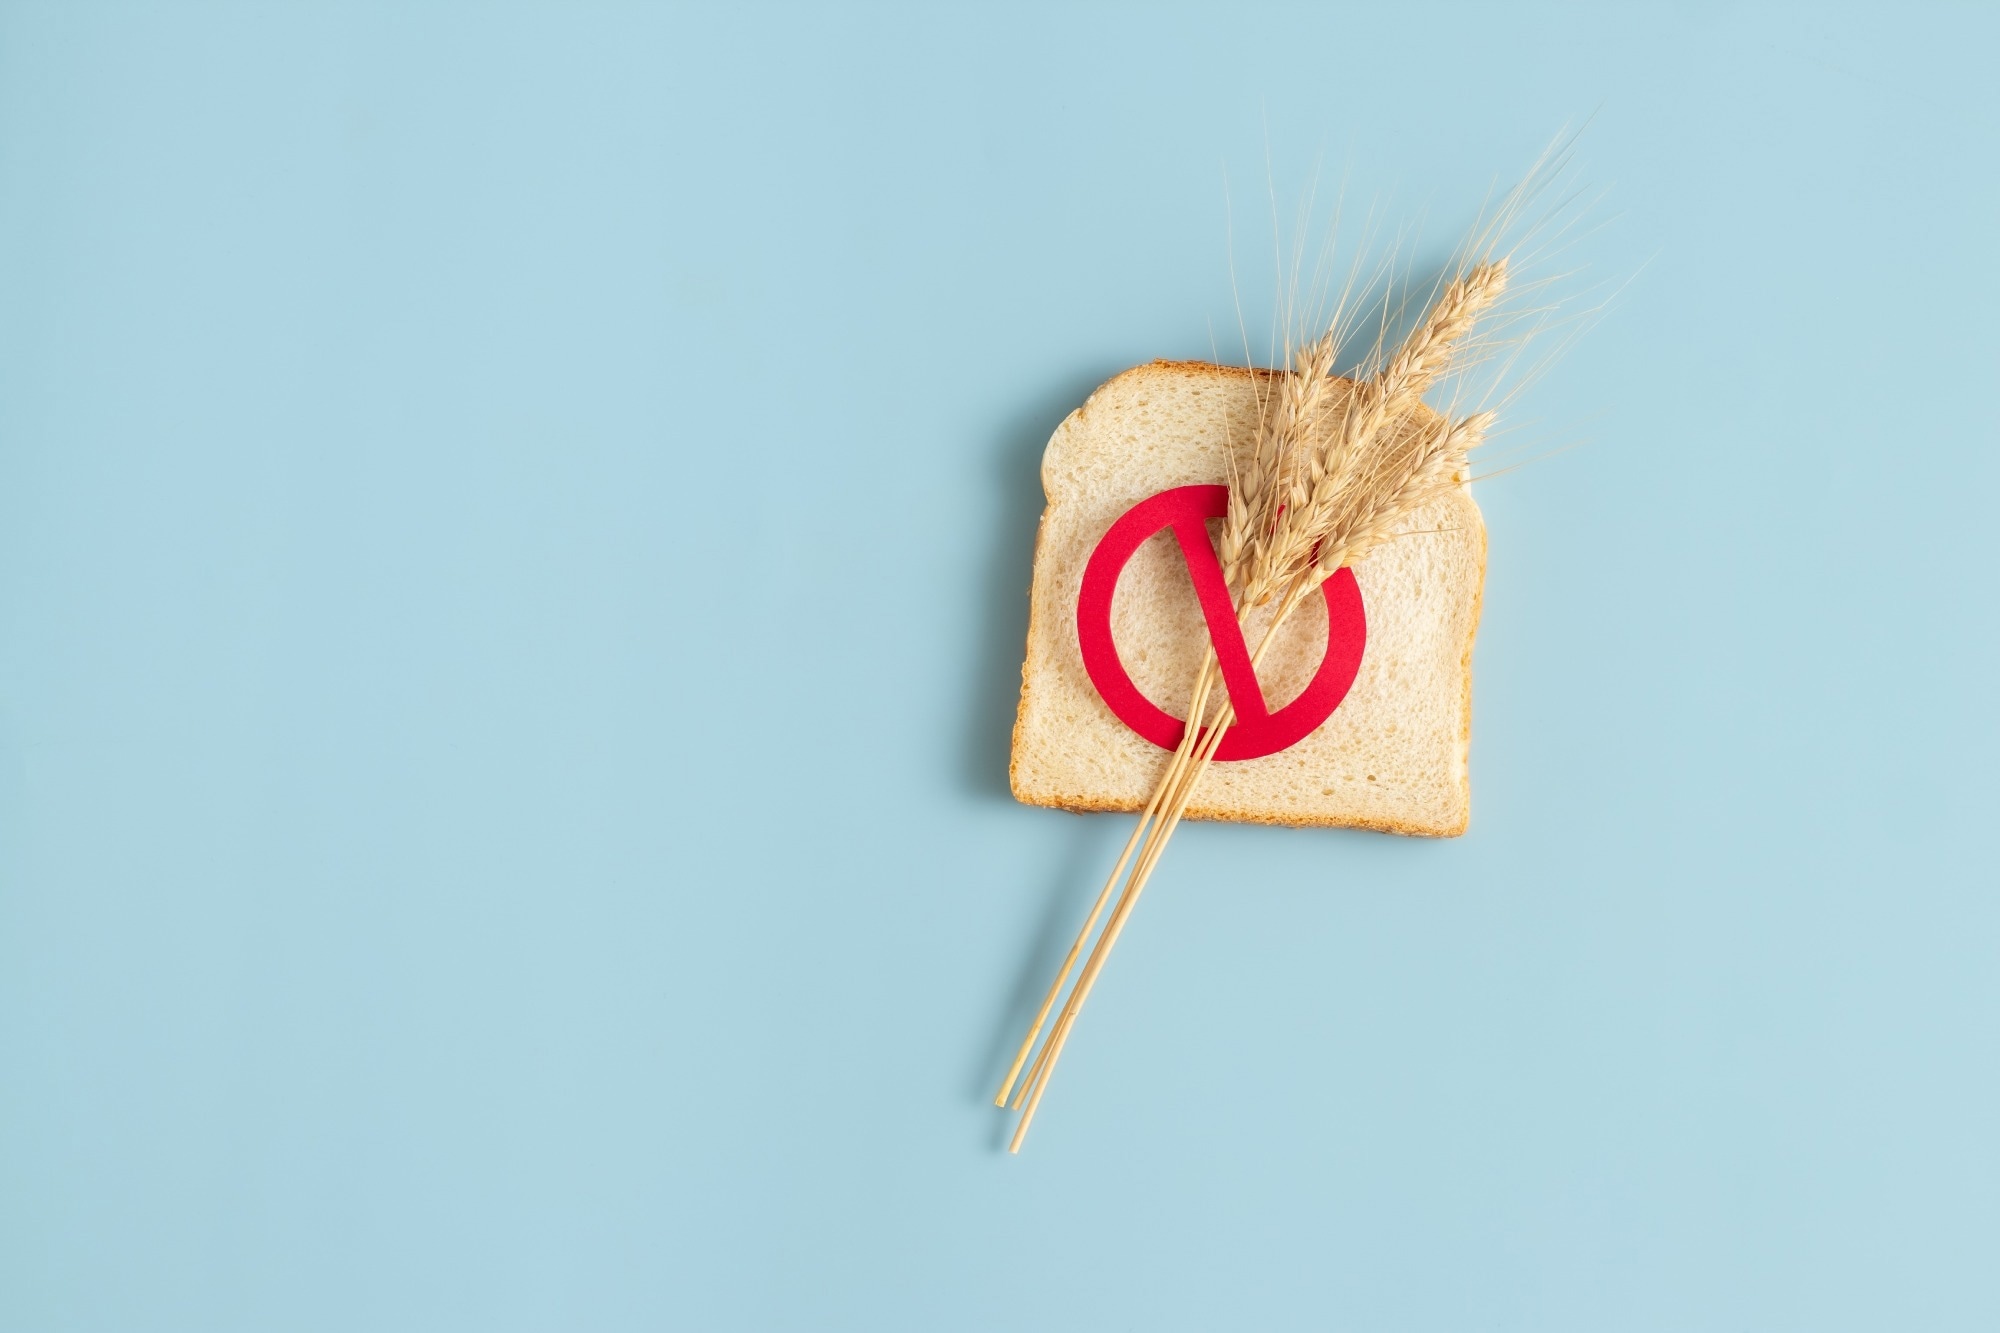 Review: Gluten and Wheat in Women’s Health: Beyond the Gut. Image Credit: Galigrafiya / Shutterstock